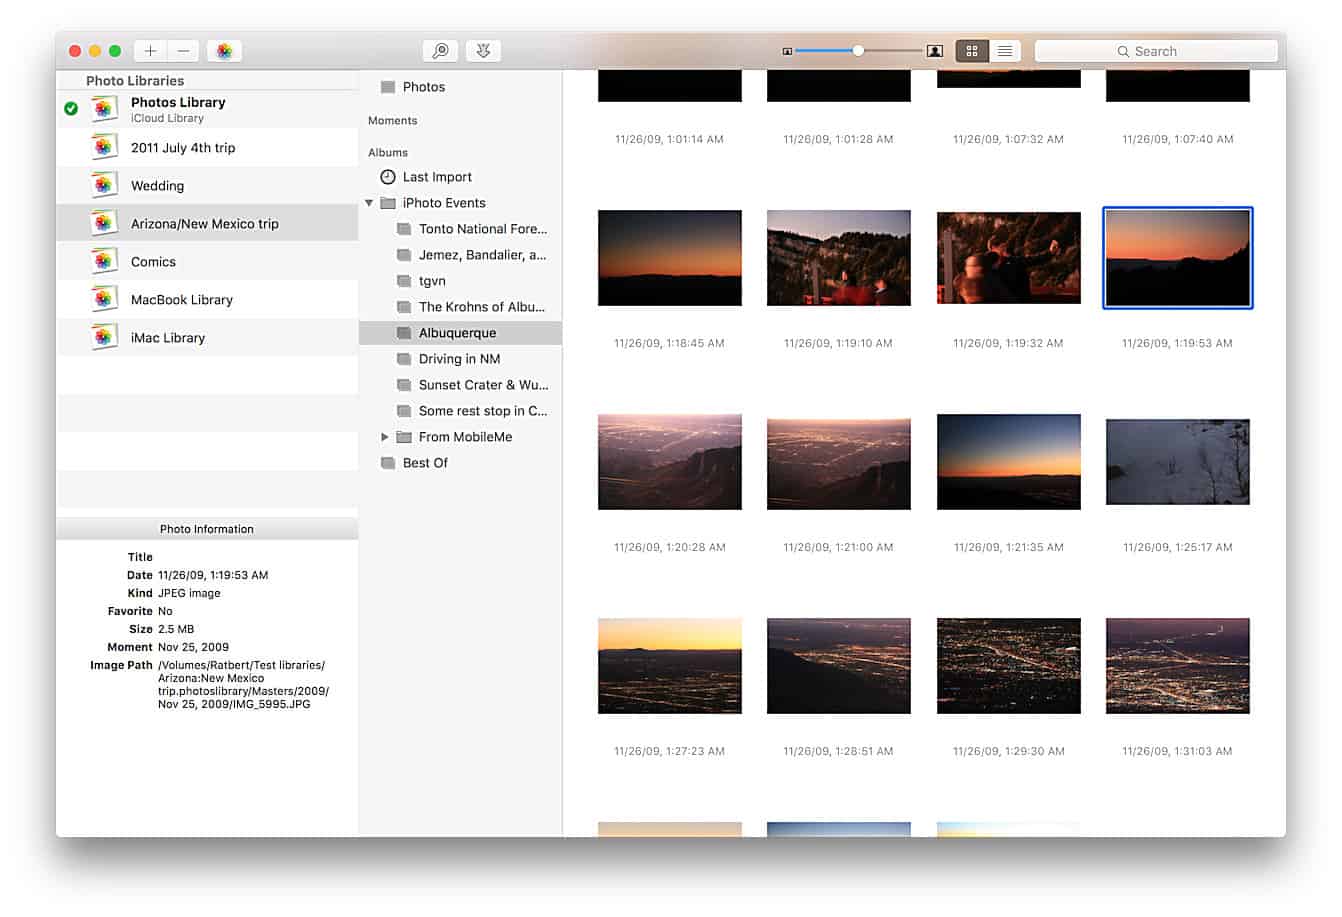 PowerPhotos gives you a new way to manage photos on Mac.